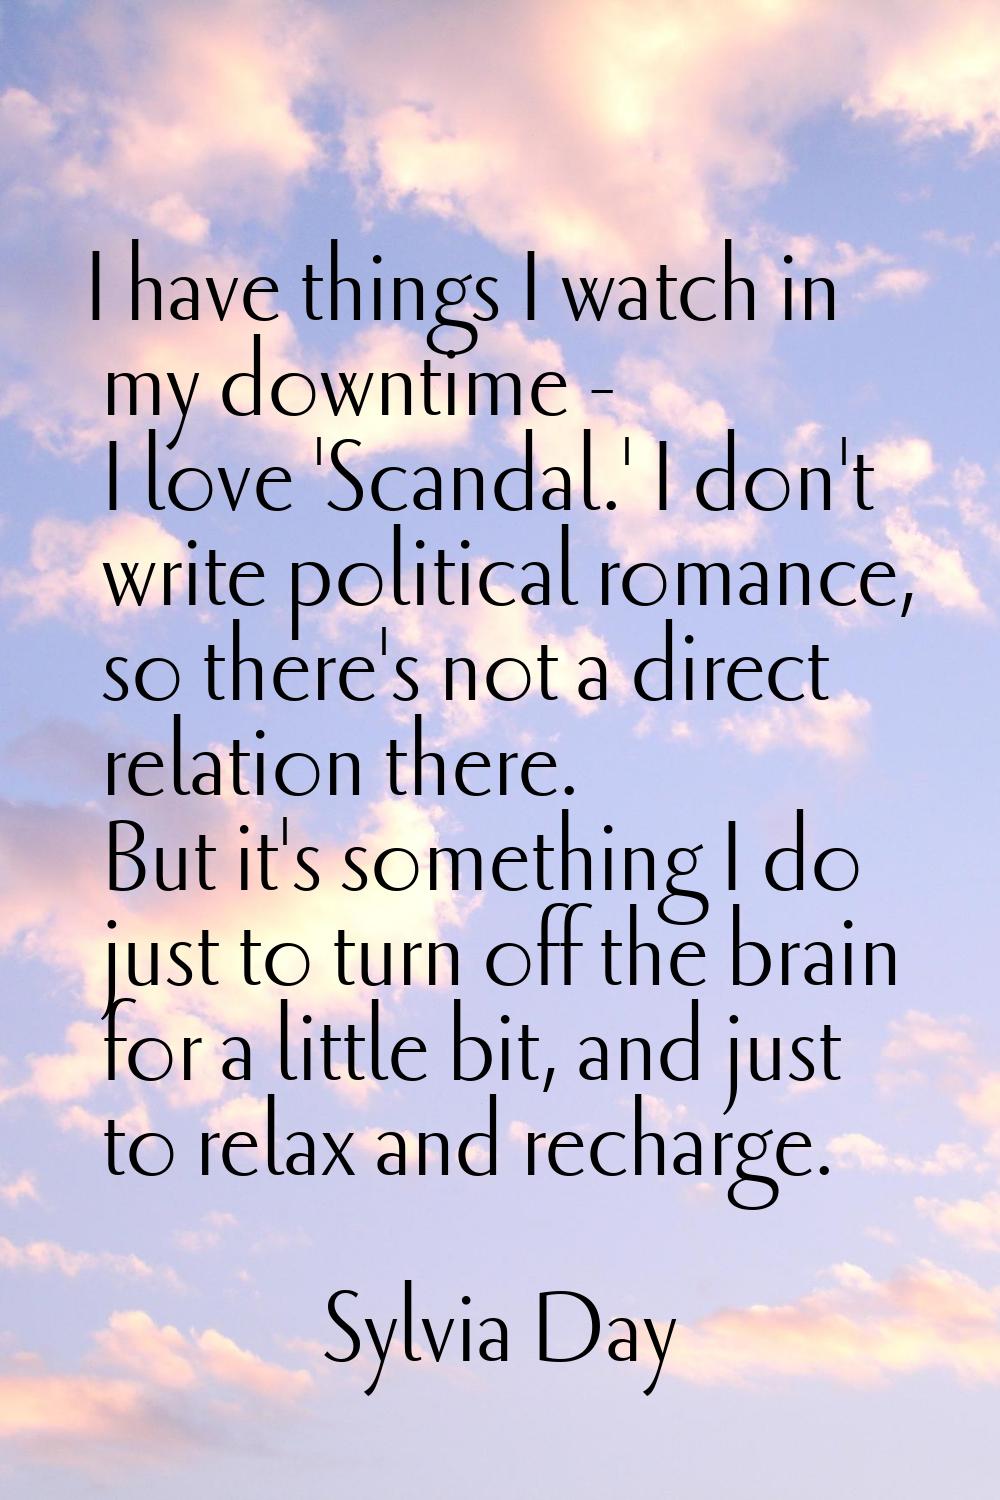 I have things I watch in my downtime - I love 'Scandal.' I don't write political romance, so there'